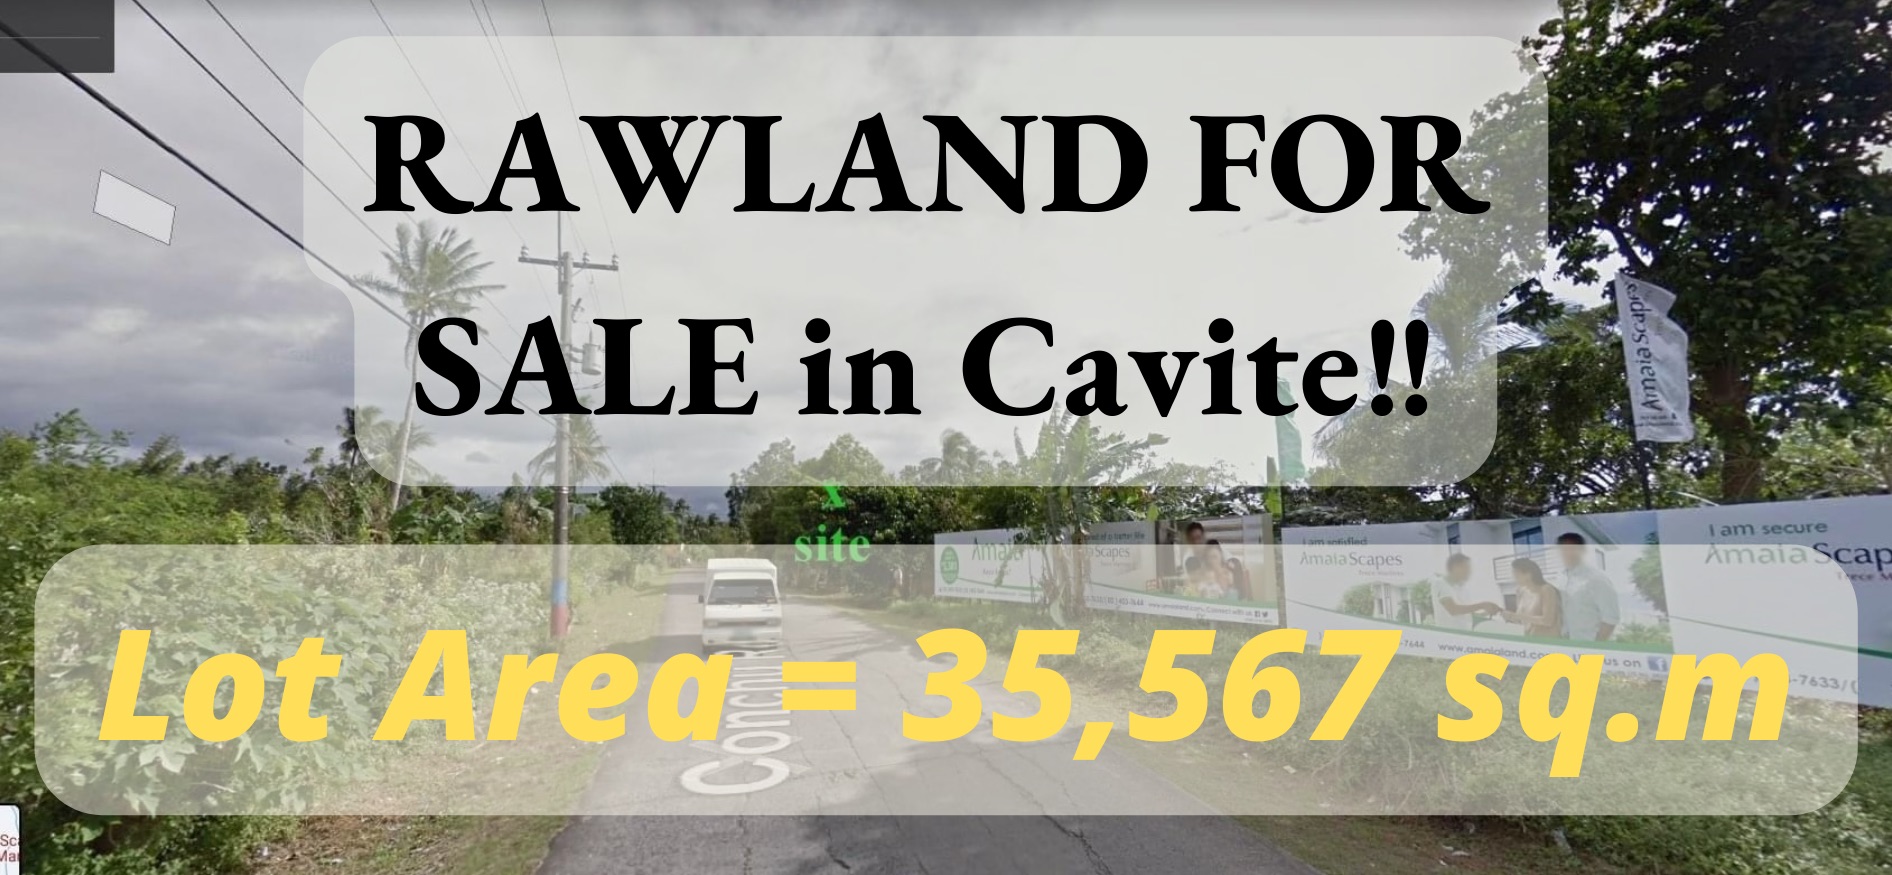 RAWLAND FOR SALE in Cavite‼️